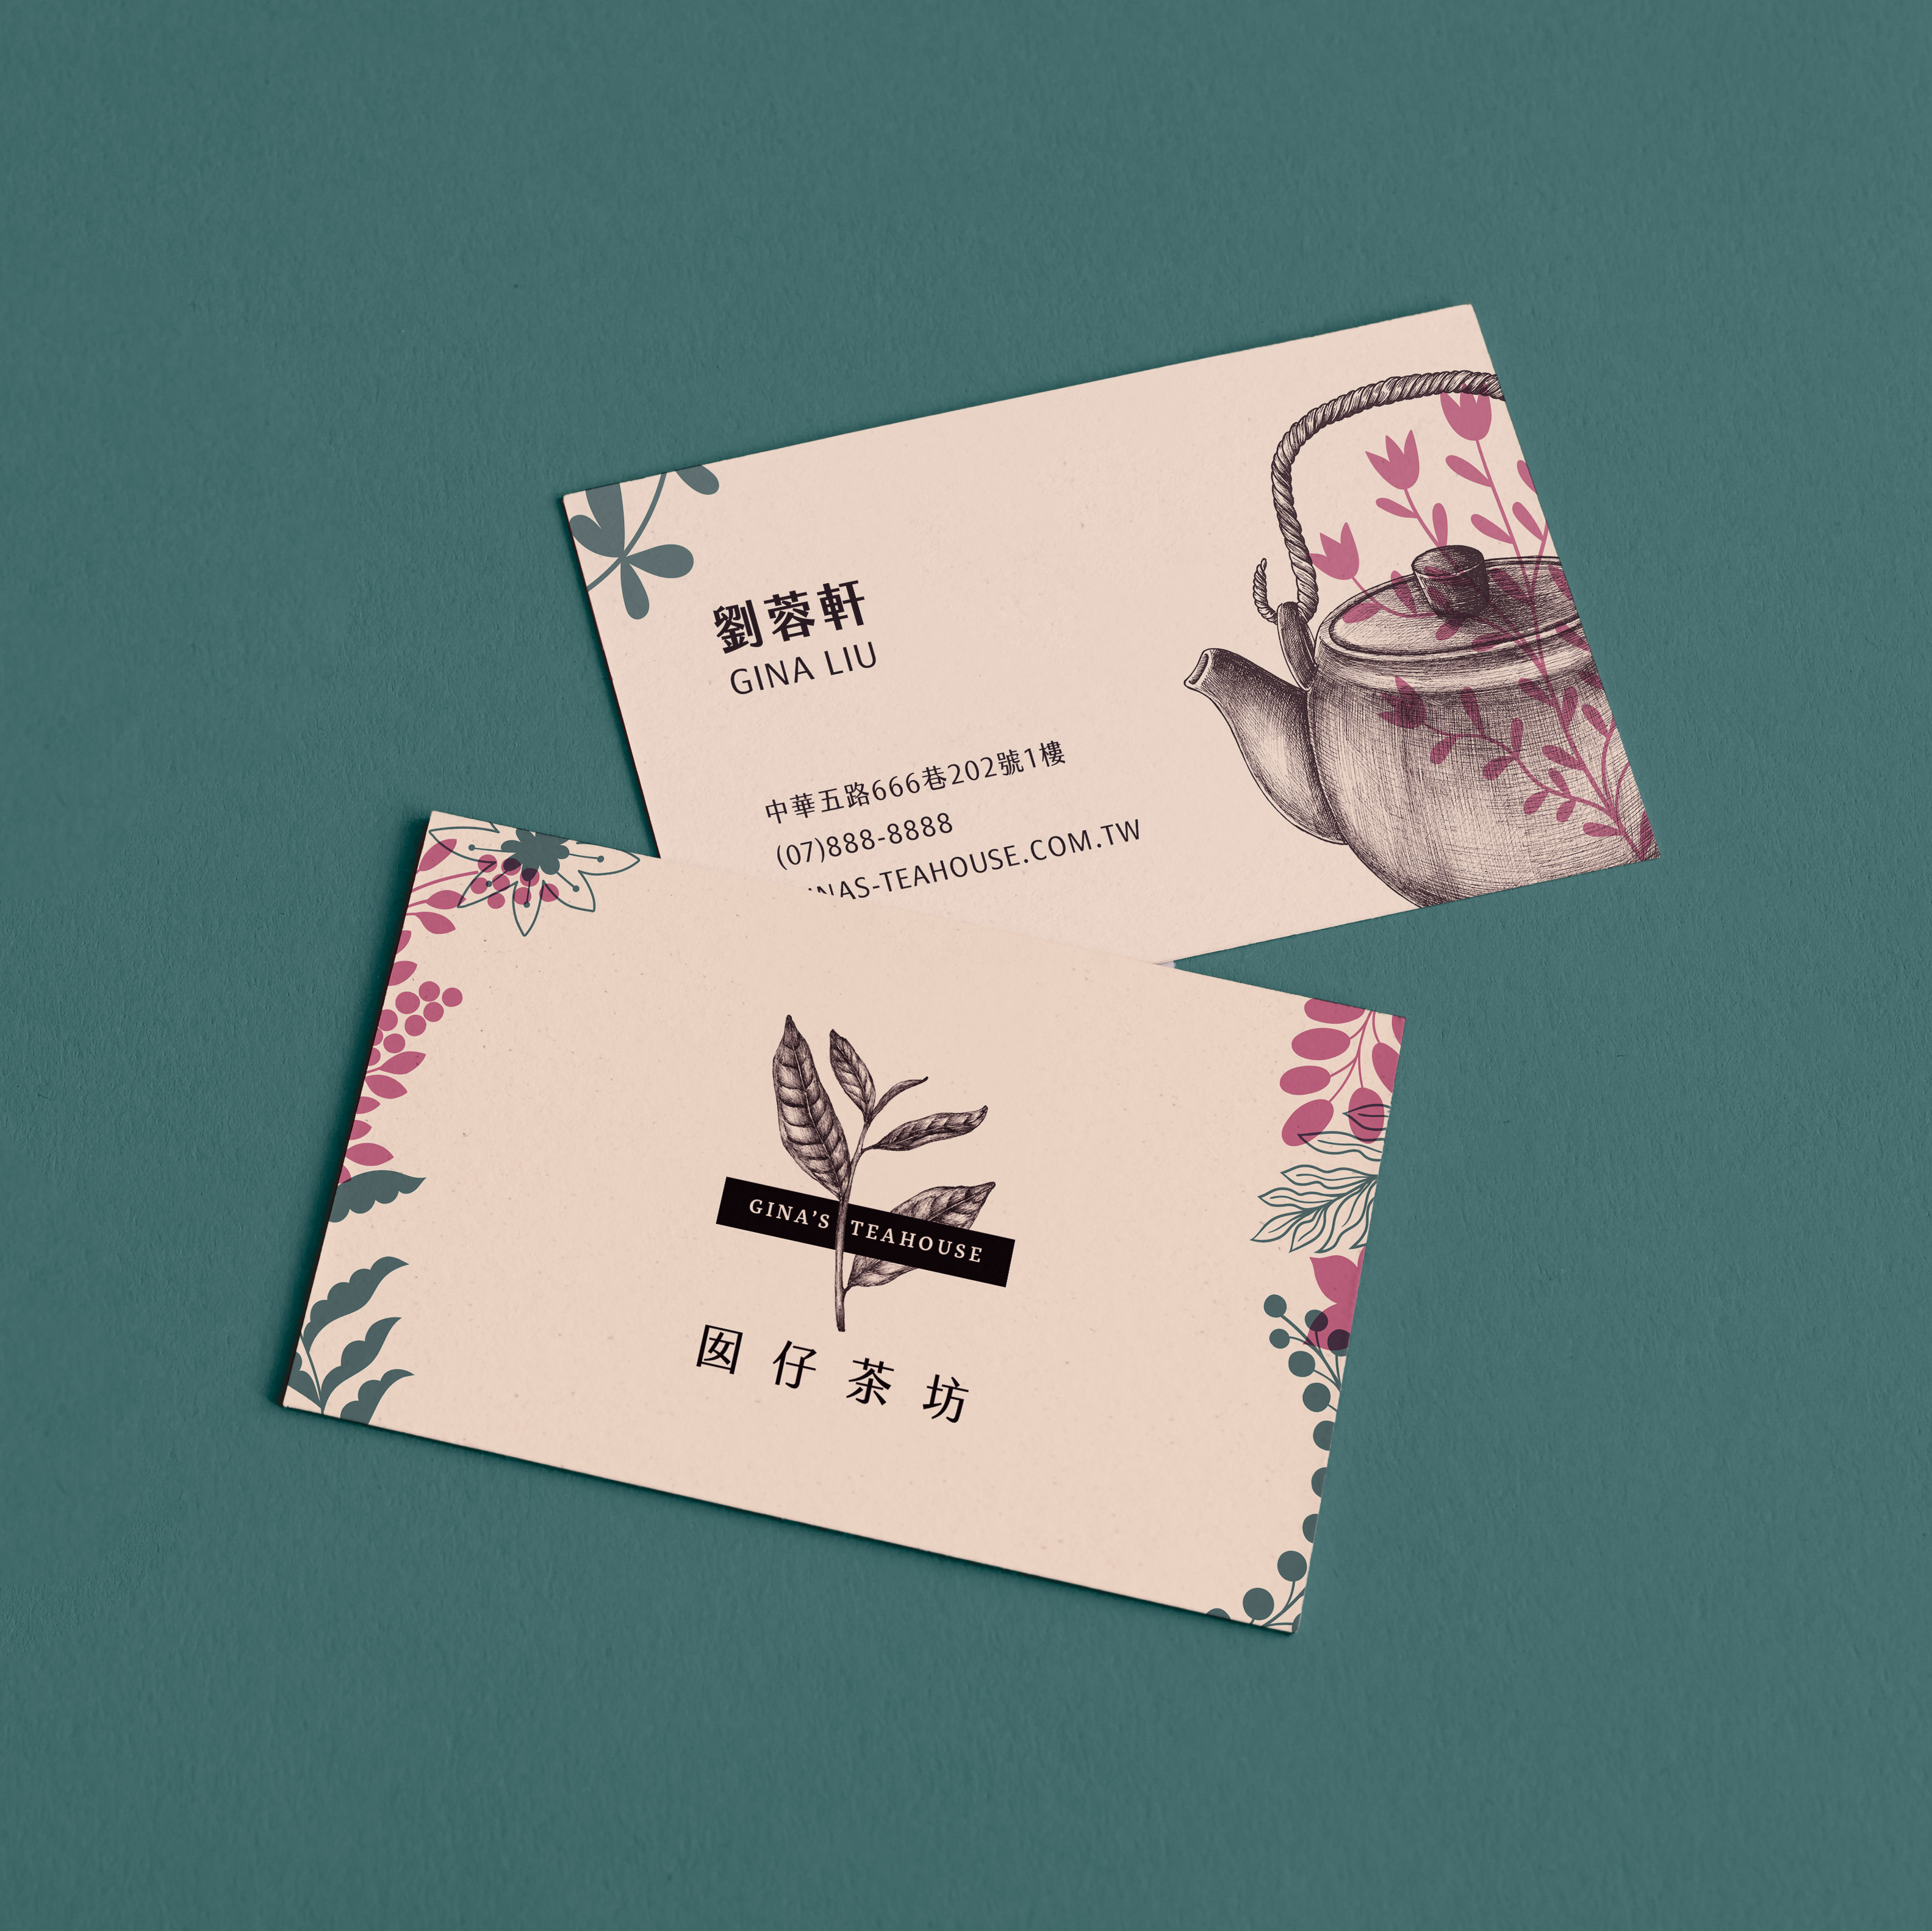 Mockups of the front and back of a business card. On the front is the logo surrounded by floral illustrations. On the back is the name, contact information, and an illustration of a teapot and florals.